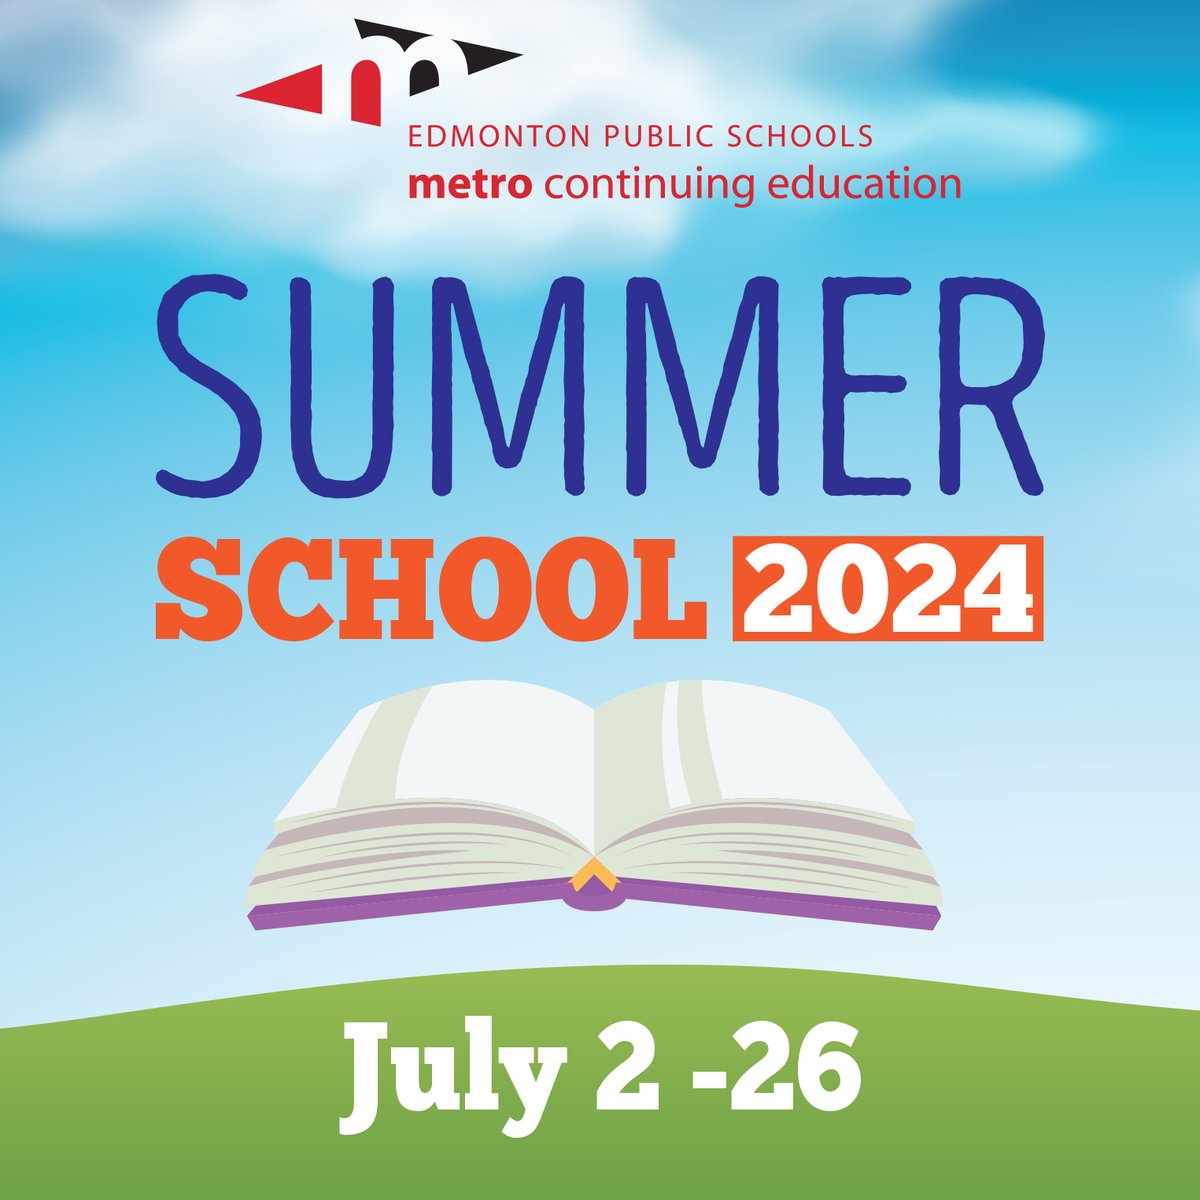 Summer school can help you prepare for the year ahead, lighten your schedule or upgrade a class in just four weeks. ☀️📚 Register now through @metroconed and make this summer one for the books: metrocontinuingeducation.ca/summer-school/ #EPSB #yeg #learnatmetro